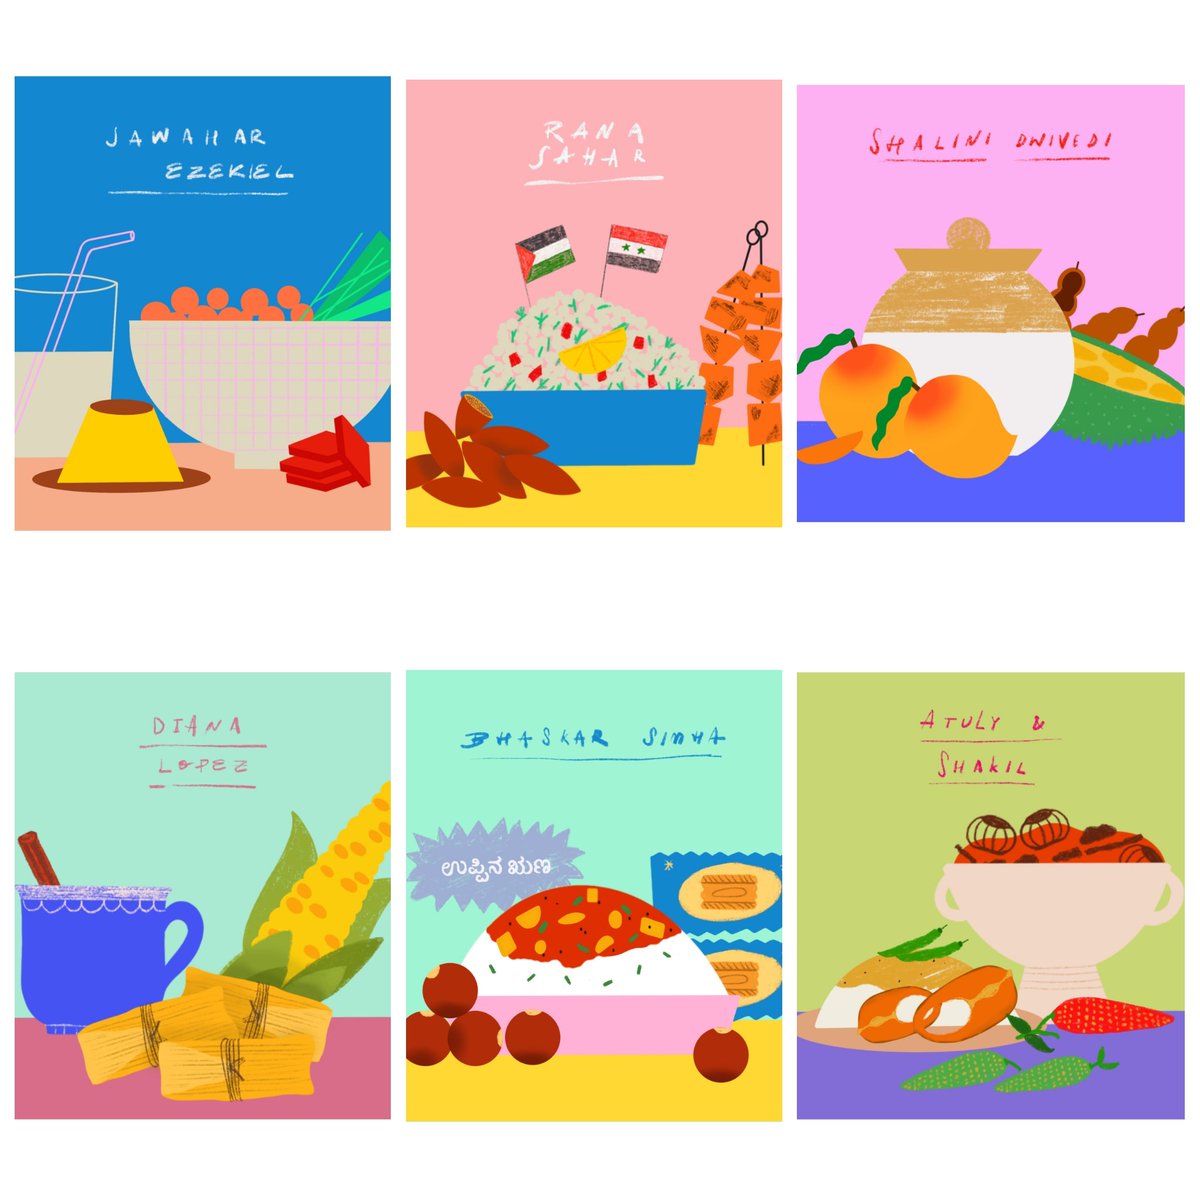 If only one could eat colours! Stunning illustrations by Shivani Parasnis for #tabletalk. To read and know more head to joinourtabletalk.com! #food #foodmemories #stories #identity #belonging #home #illustration